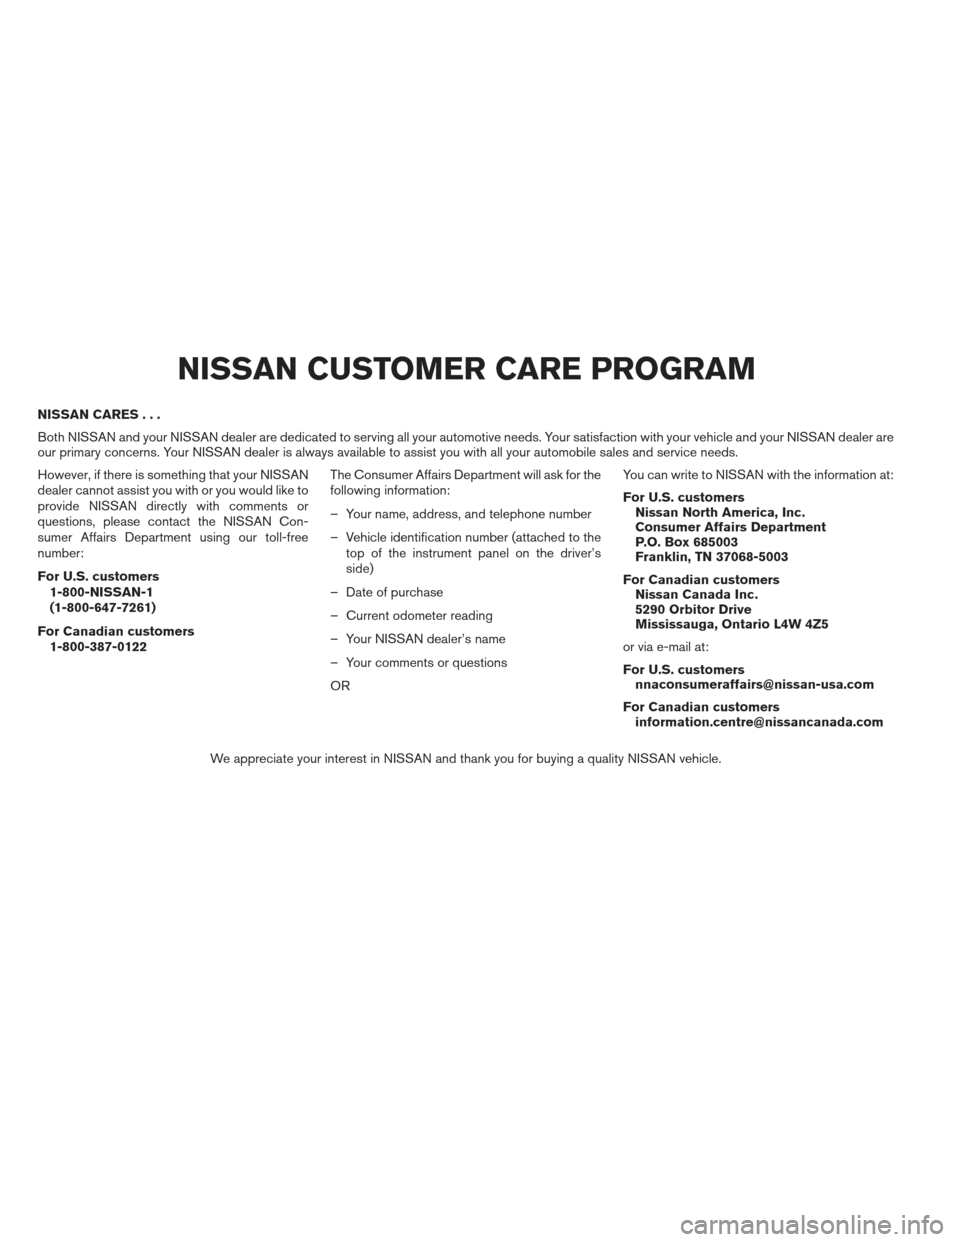 NISSAN ALTIMA COUPE 2012 D32 / 4.G Owners Manual NISSAN CARES...
Both NISSAN and your NISSAN dealer are dedicated to serving all your automotive needs. Your satisfaction with your vehicle and your NISSAN dealer are
our primary concerns. Your NISSAN 